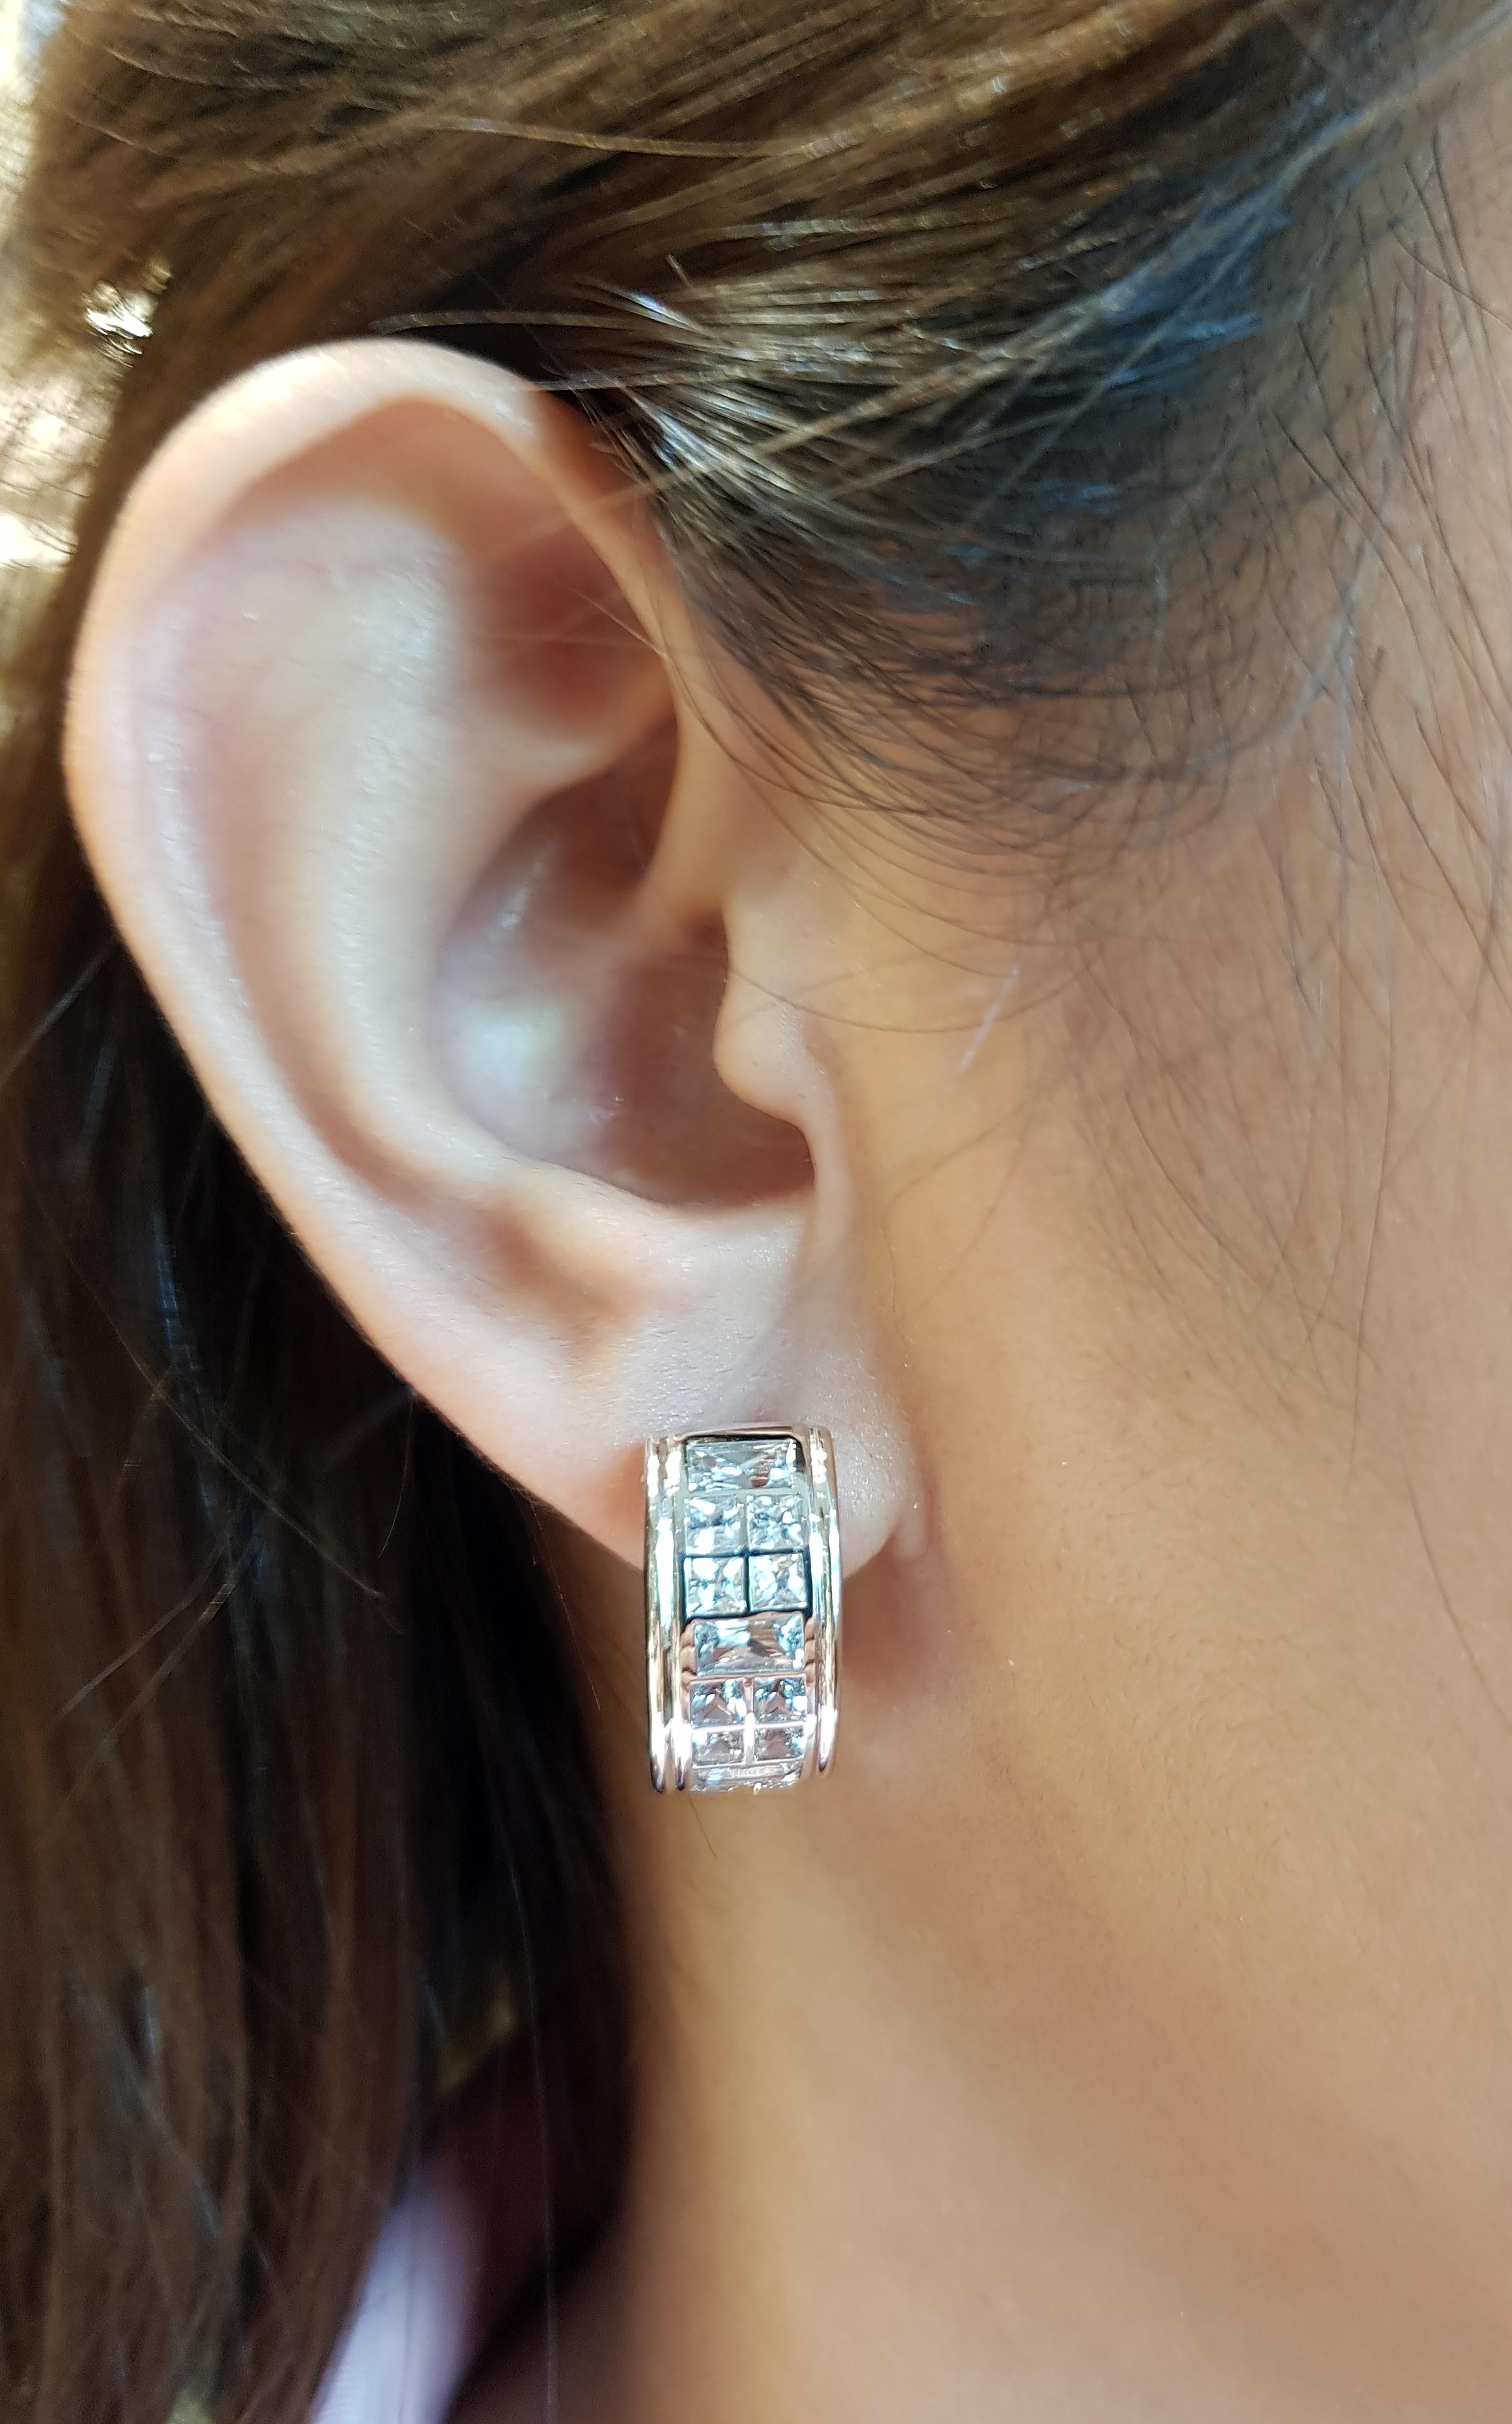 White Sapphire 4.61 carats Earrings set in 18 Karat White Gold Settings

Width:  0.8 cm 
Length: 1.9 cm
Total Weight: 14.44 grams

